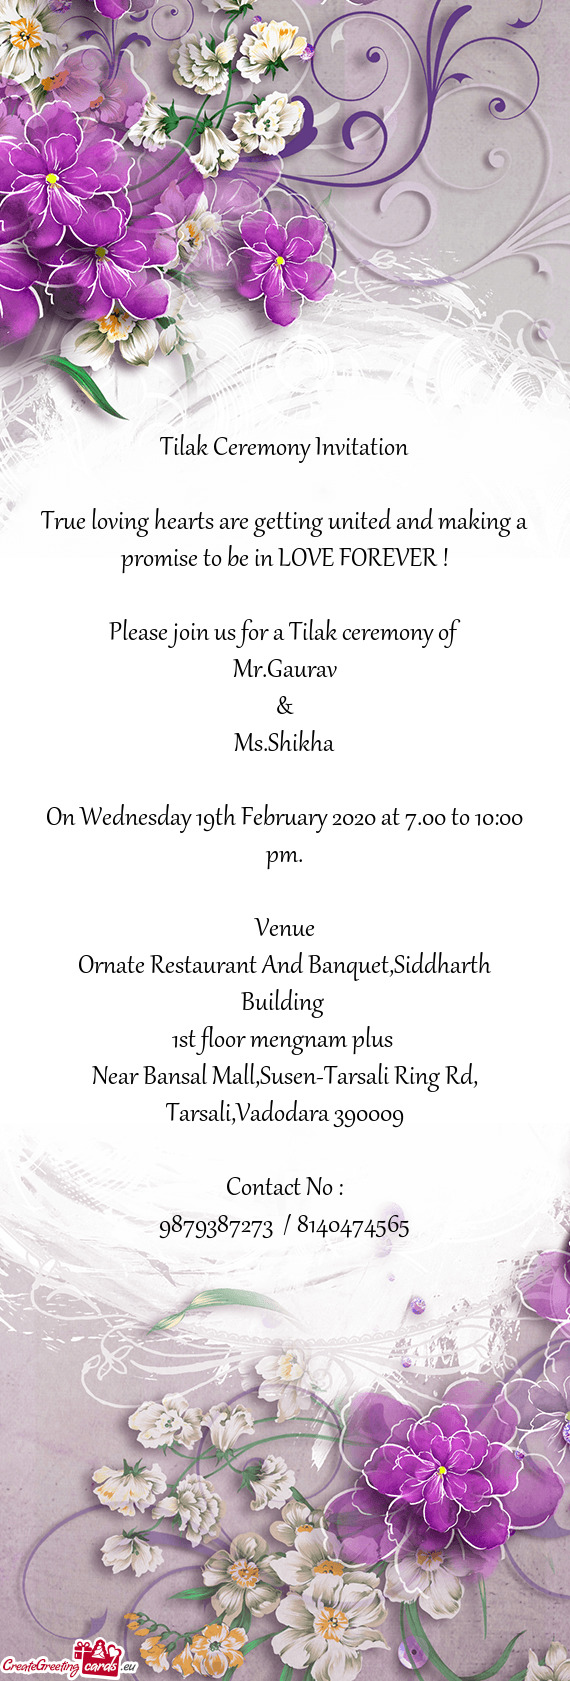 On Wednesday 19th February 2020 at 7.00 to 10:00 pm